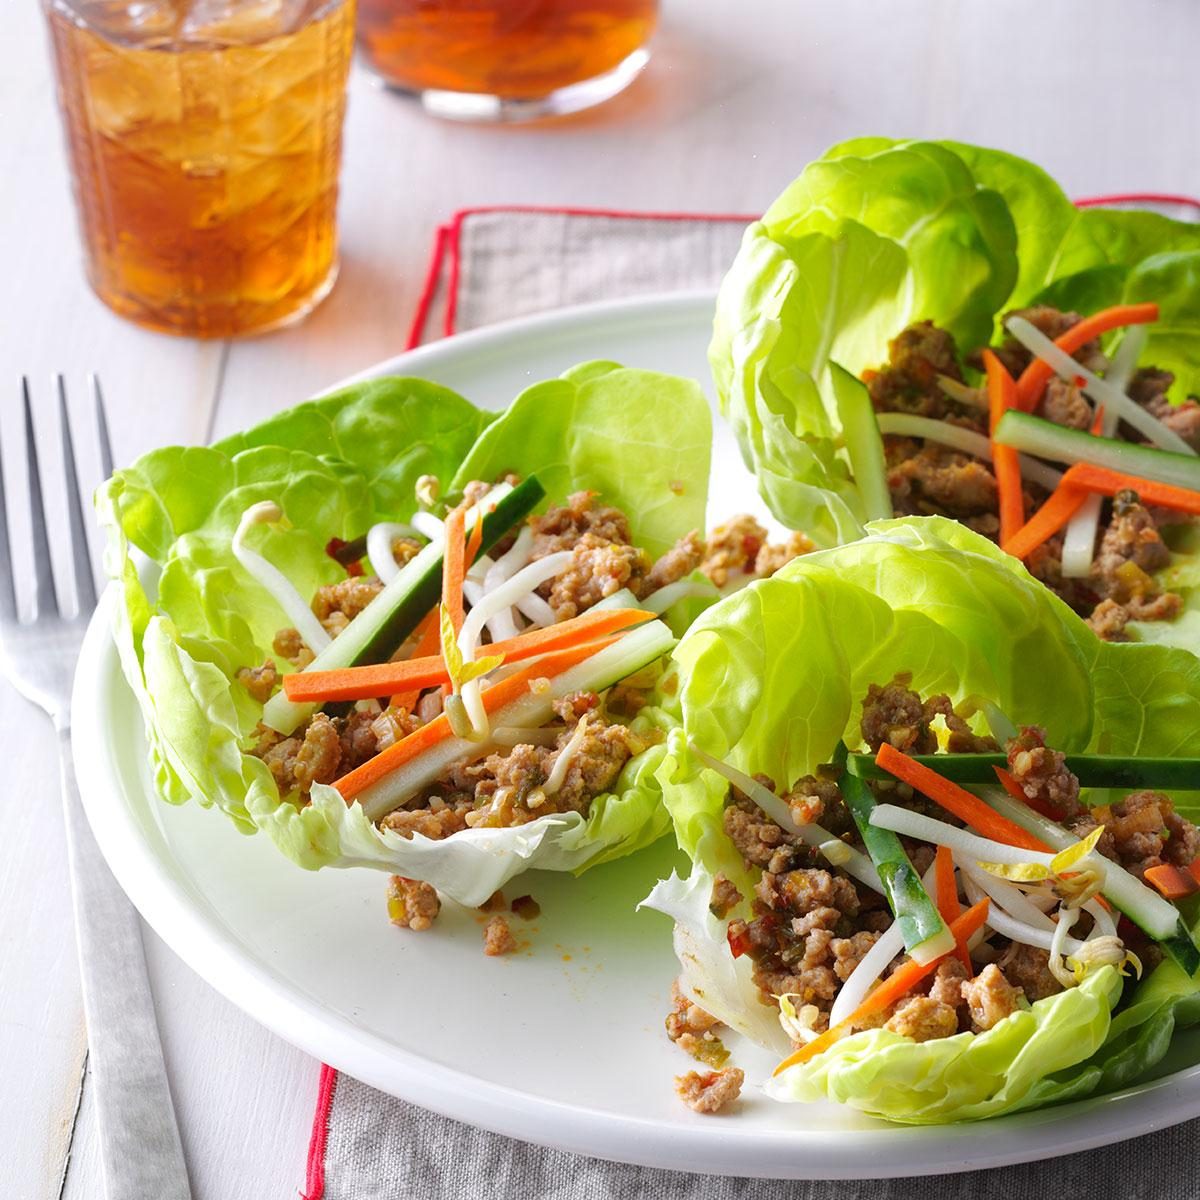 Inspired by: PF Chang's Lettuce Wraps